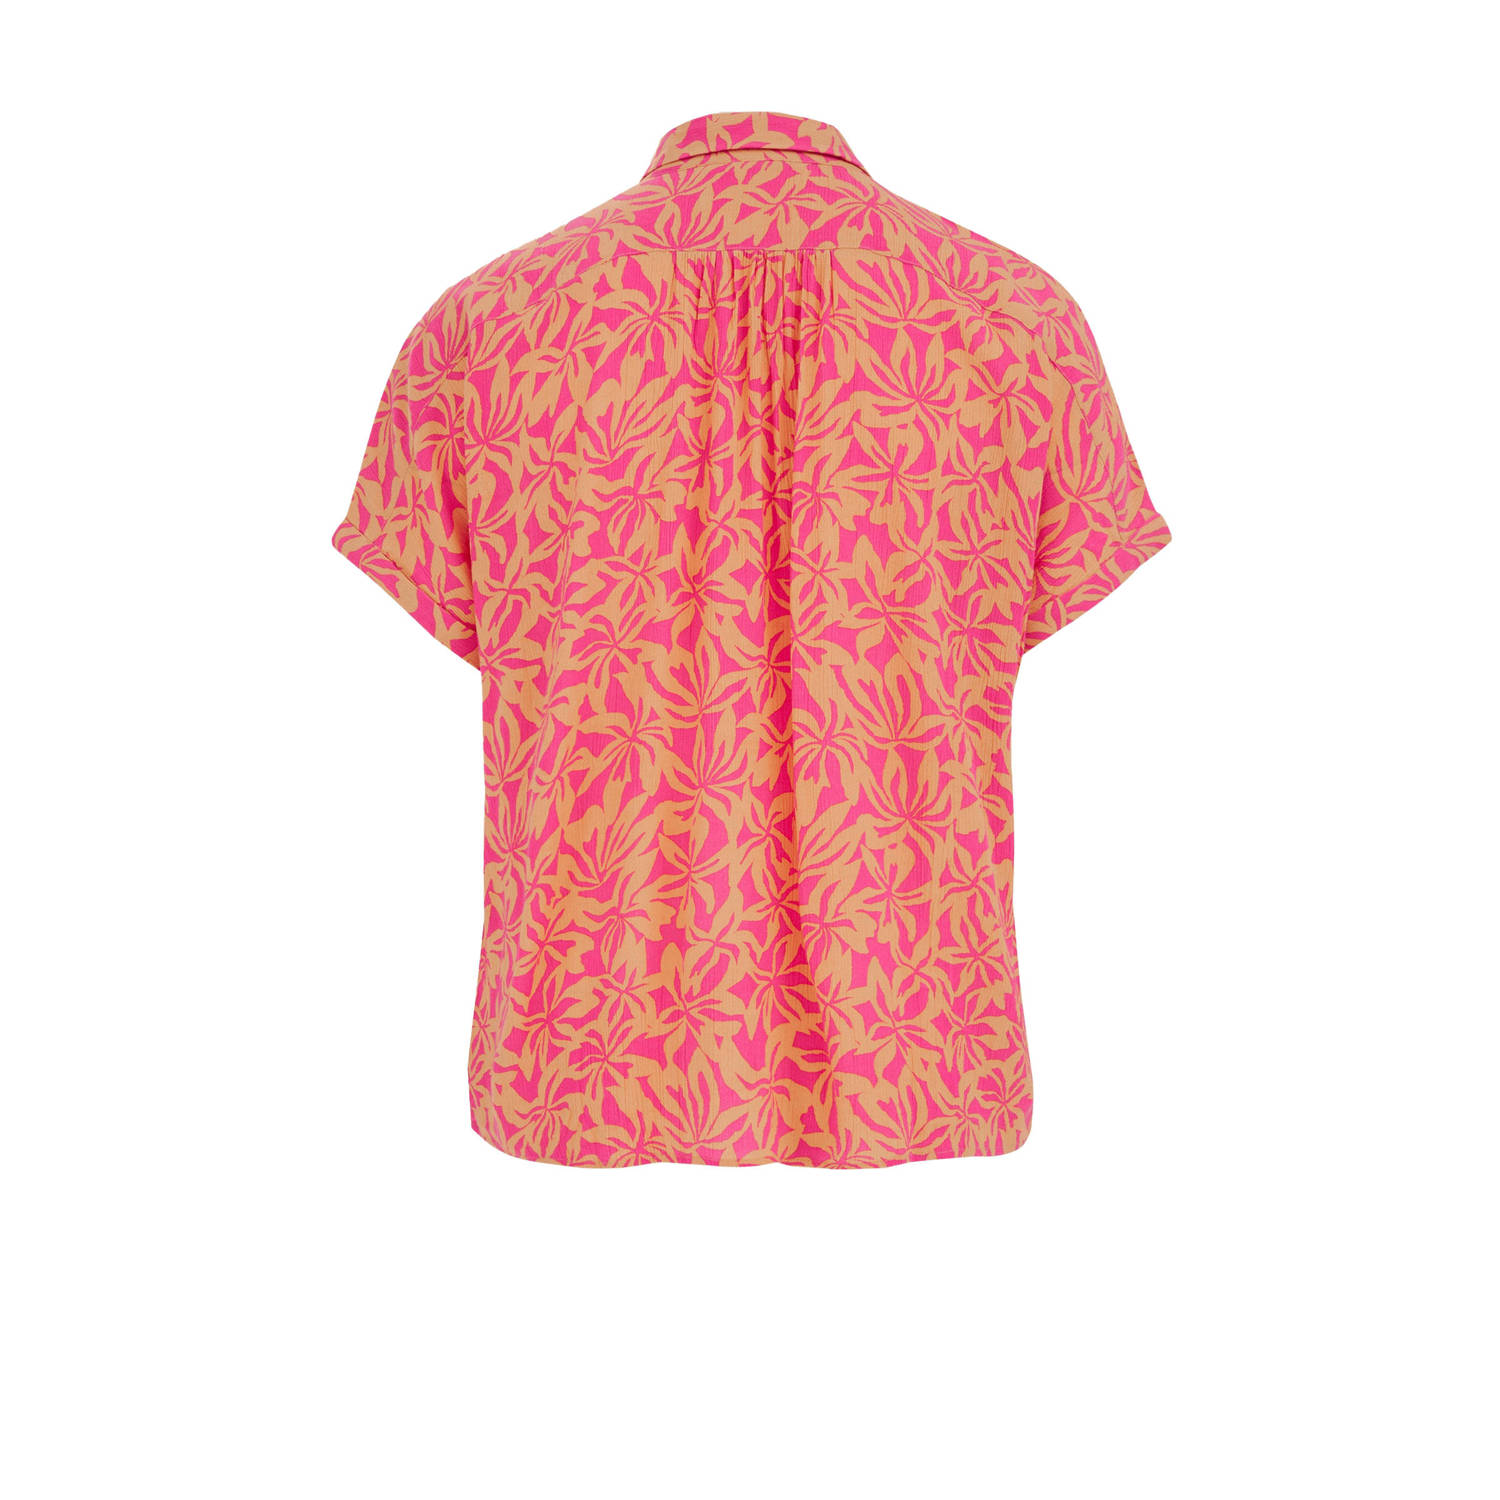 WE Fashion Curve blouse met all over print roze oranje